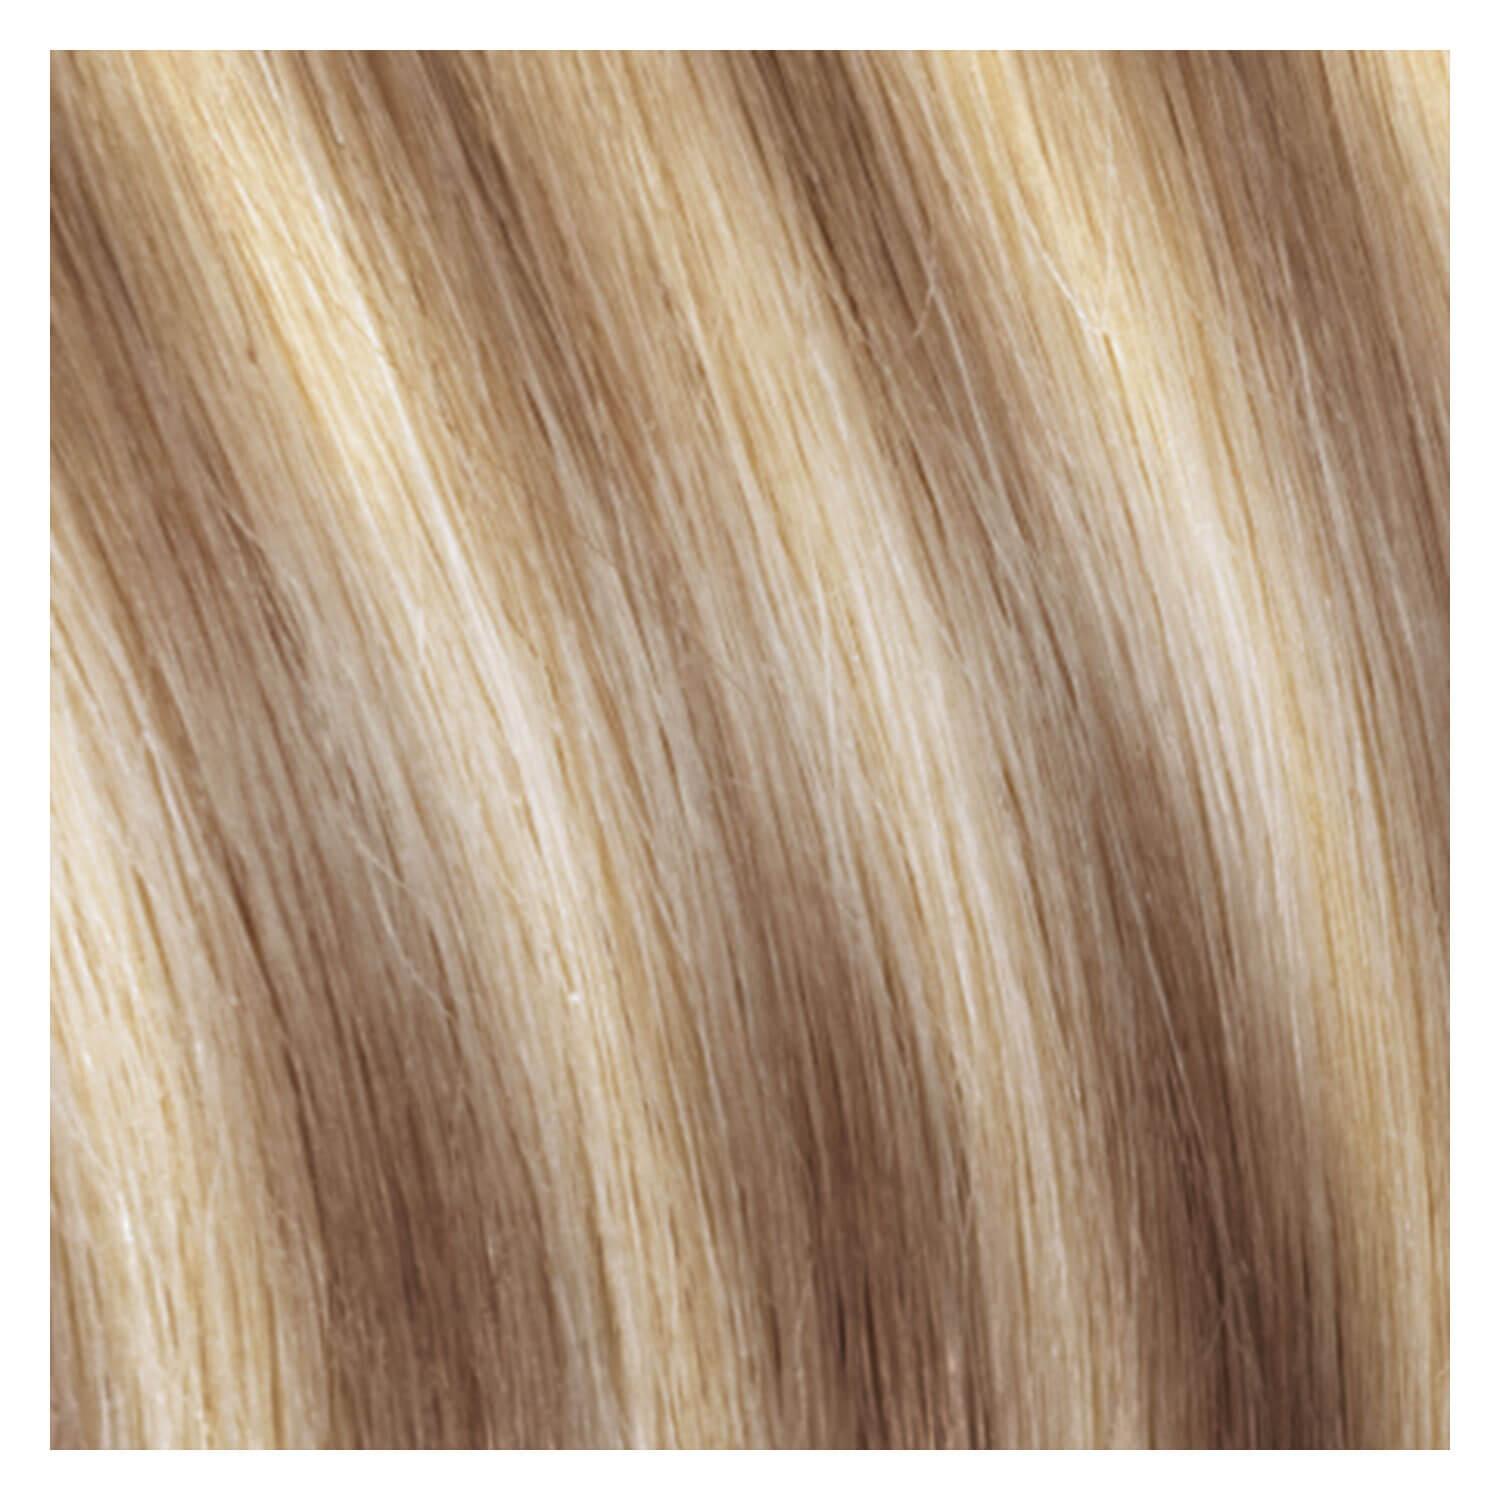 SHE Tape In-System Hair Extensions Straight - M14/1001 Natürliches Hellblond/Sehr helles Platinblond